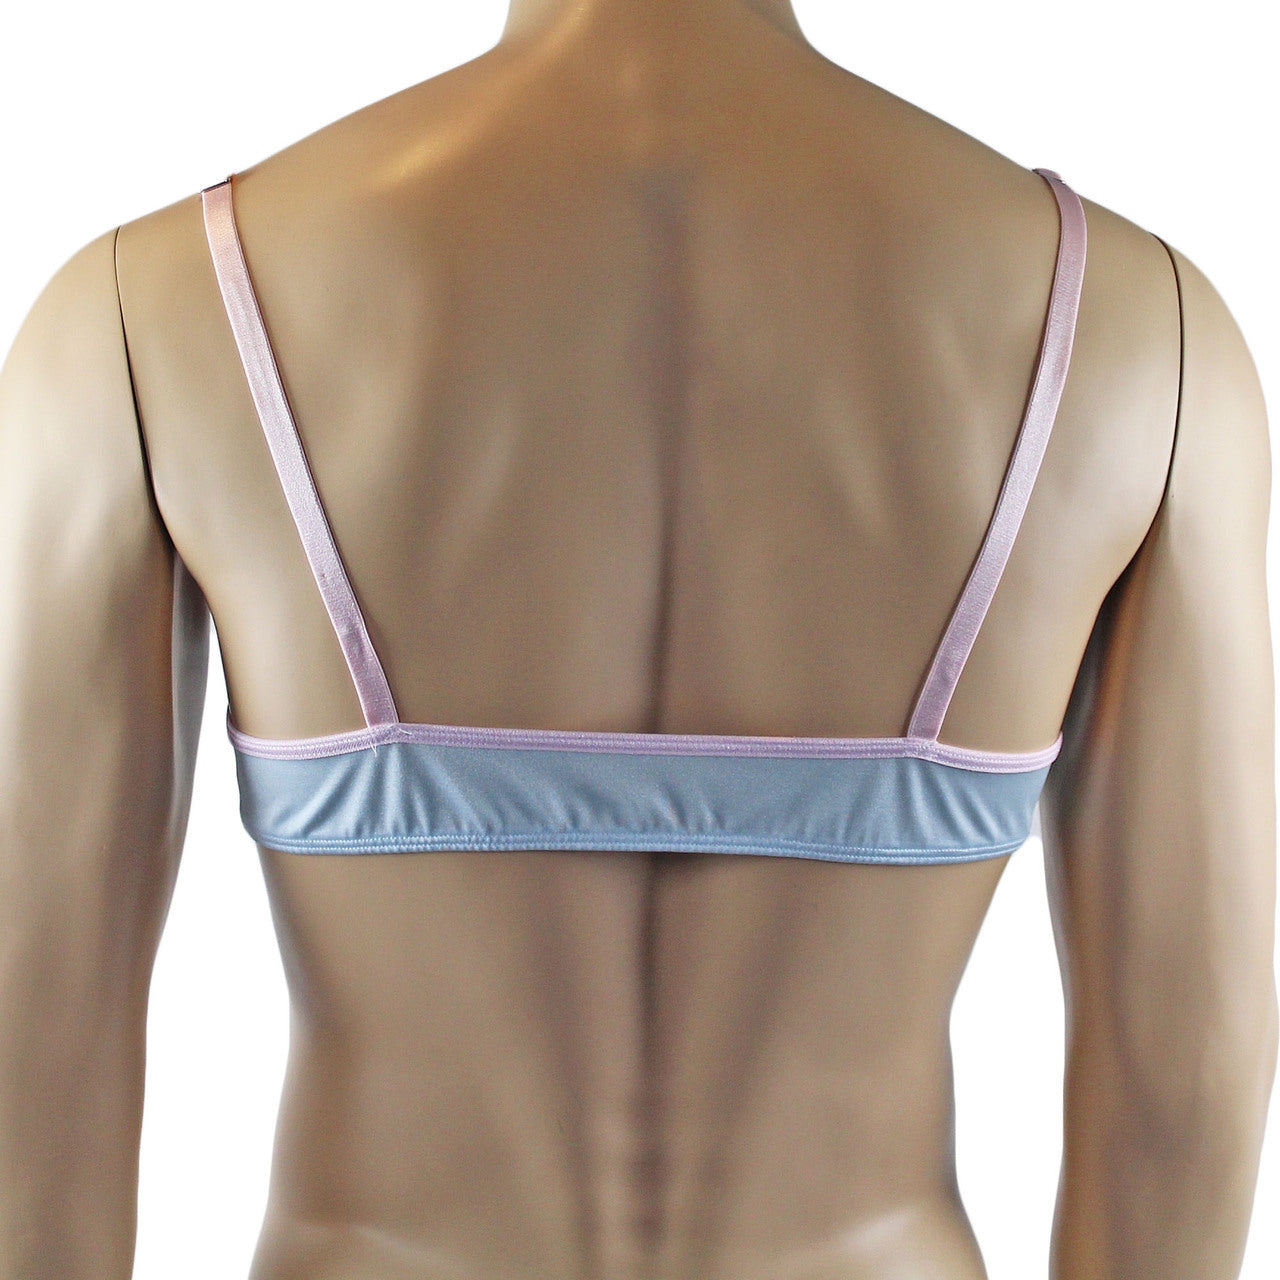 Mens Isabel Bra Top with Floral Lace Trim Male Lingerie (light blue and pink plus other colours)